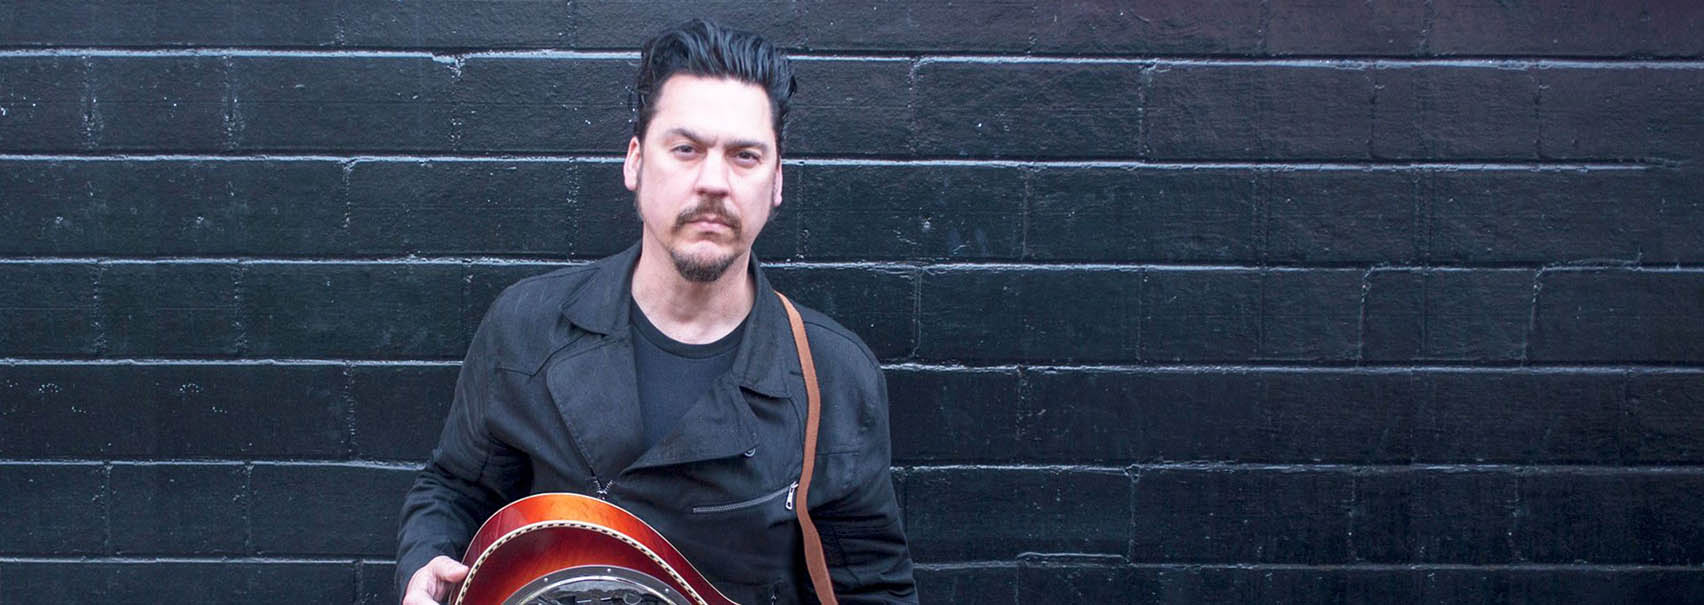 Jesse Dayton featured on Rolling Stone's 10 Best Country and Americana Songs to Hear Now